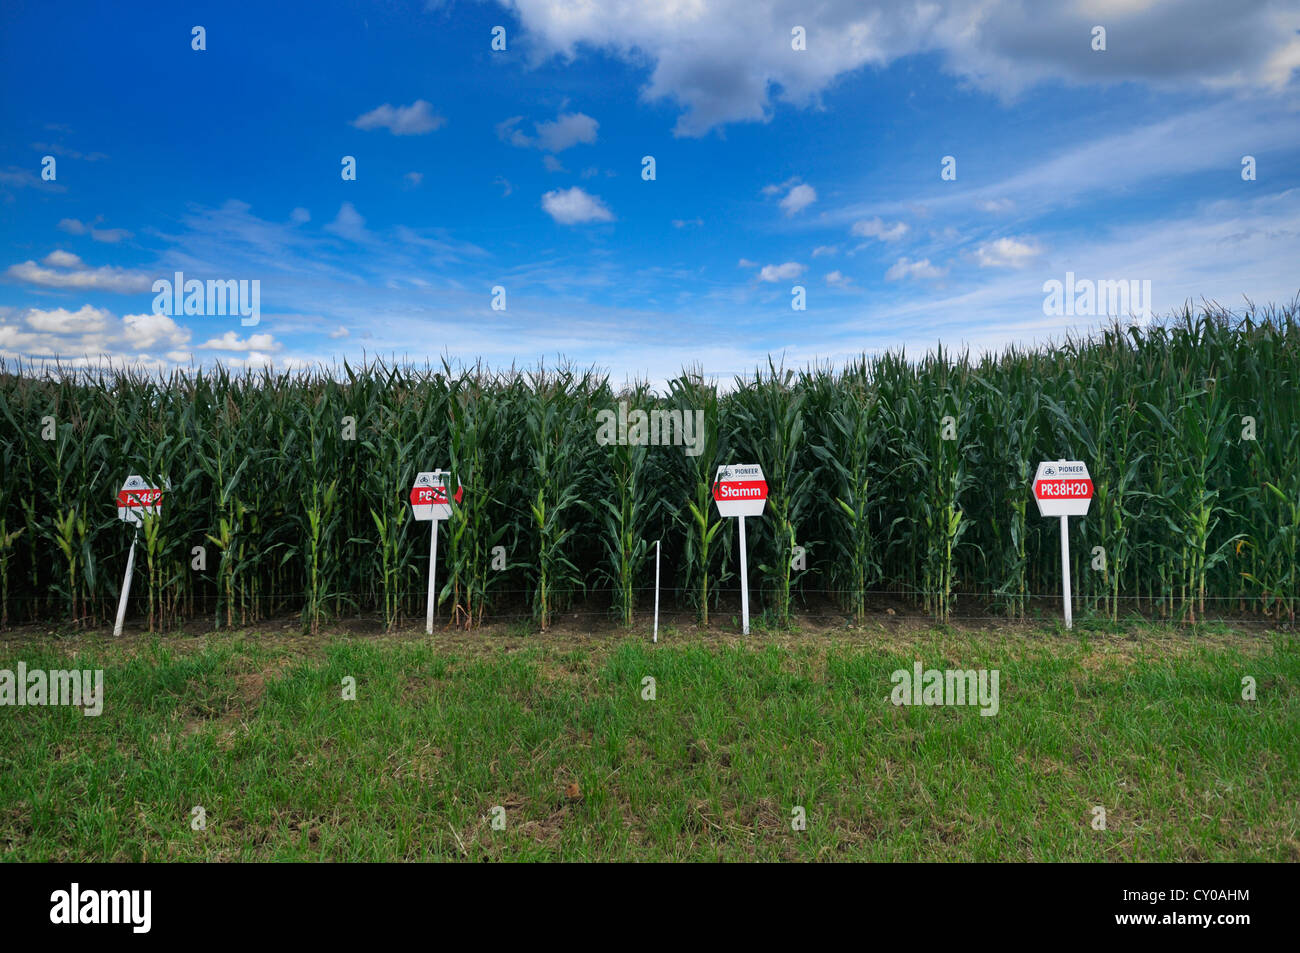 Corn field, test field with experimental plant varieties from the Pioneer company for biogas plants, renewable resources Stock Photo